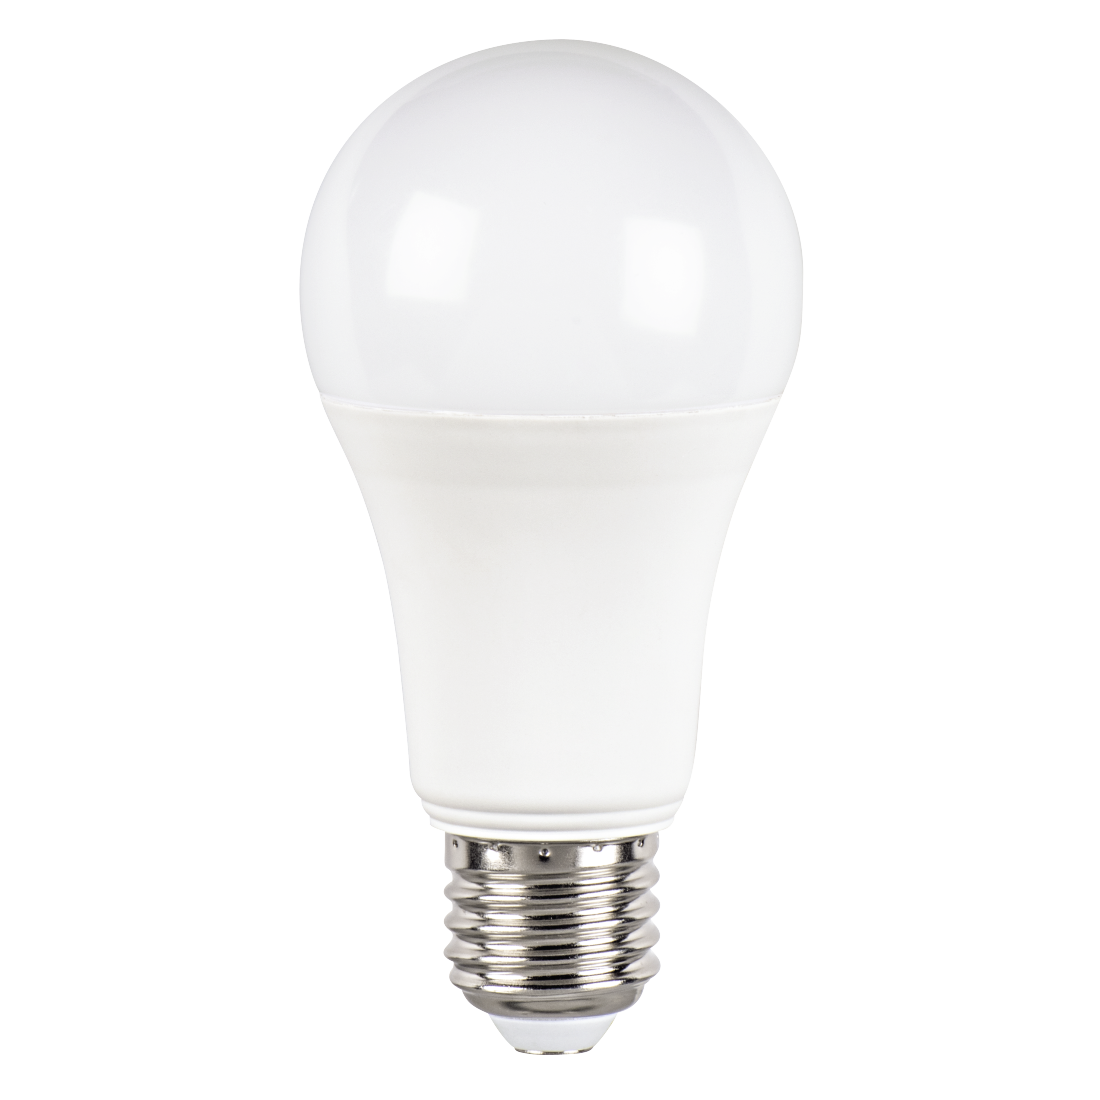 abx High-Res Image - Xavax, LED Bulb, E27, 1521lm replaces 100W, incandescent bulb, daylight